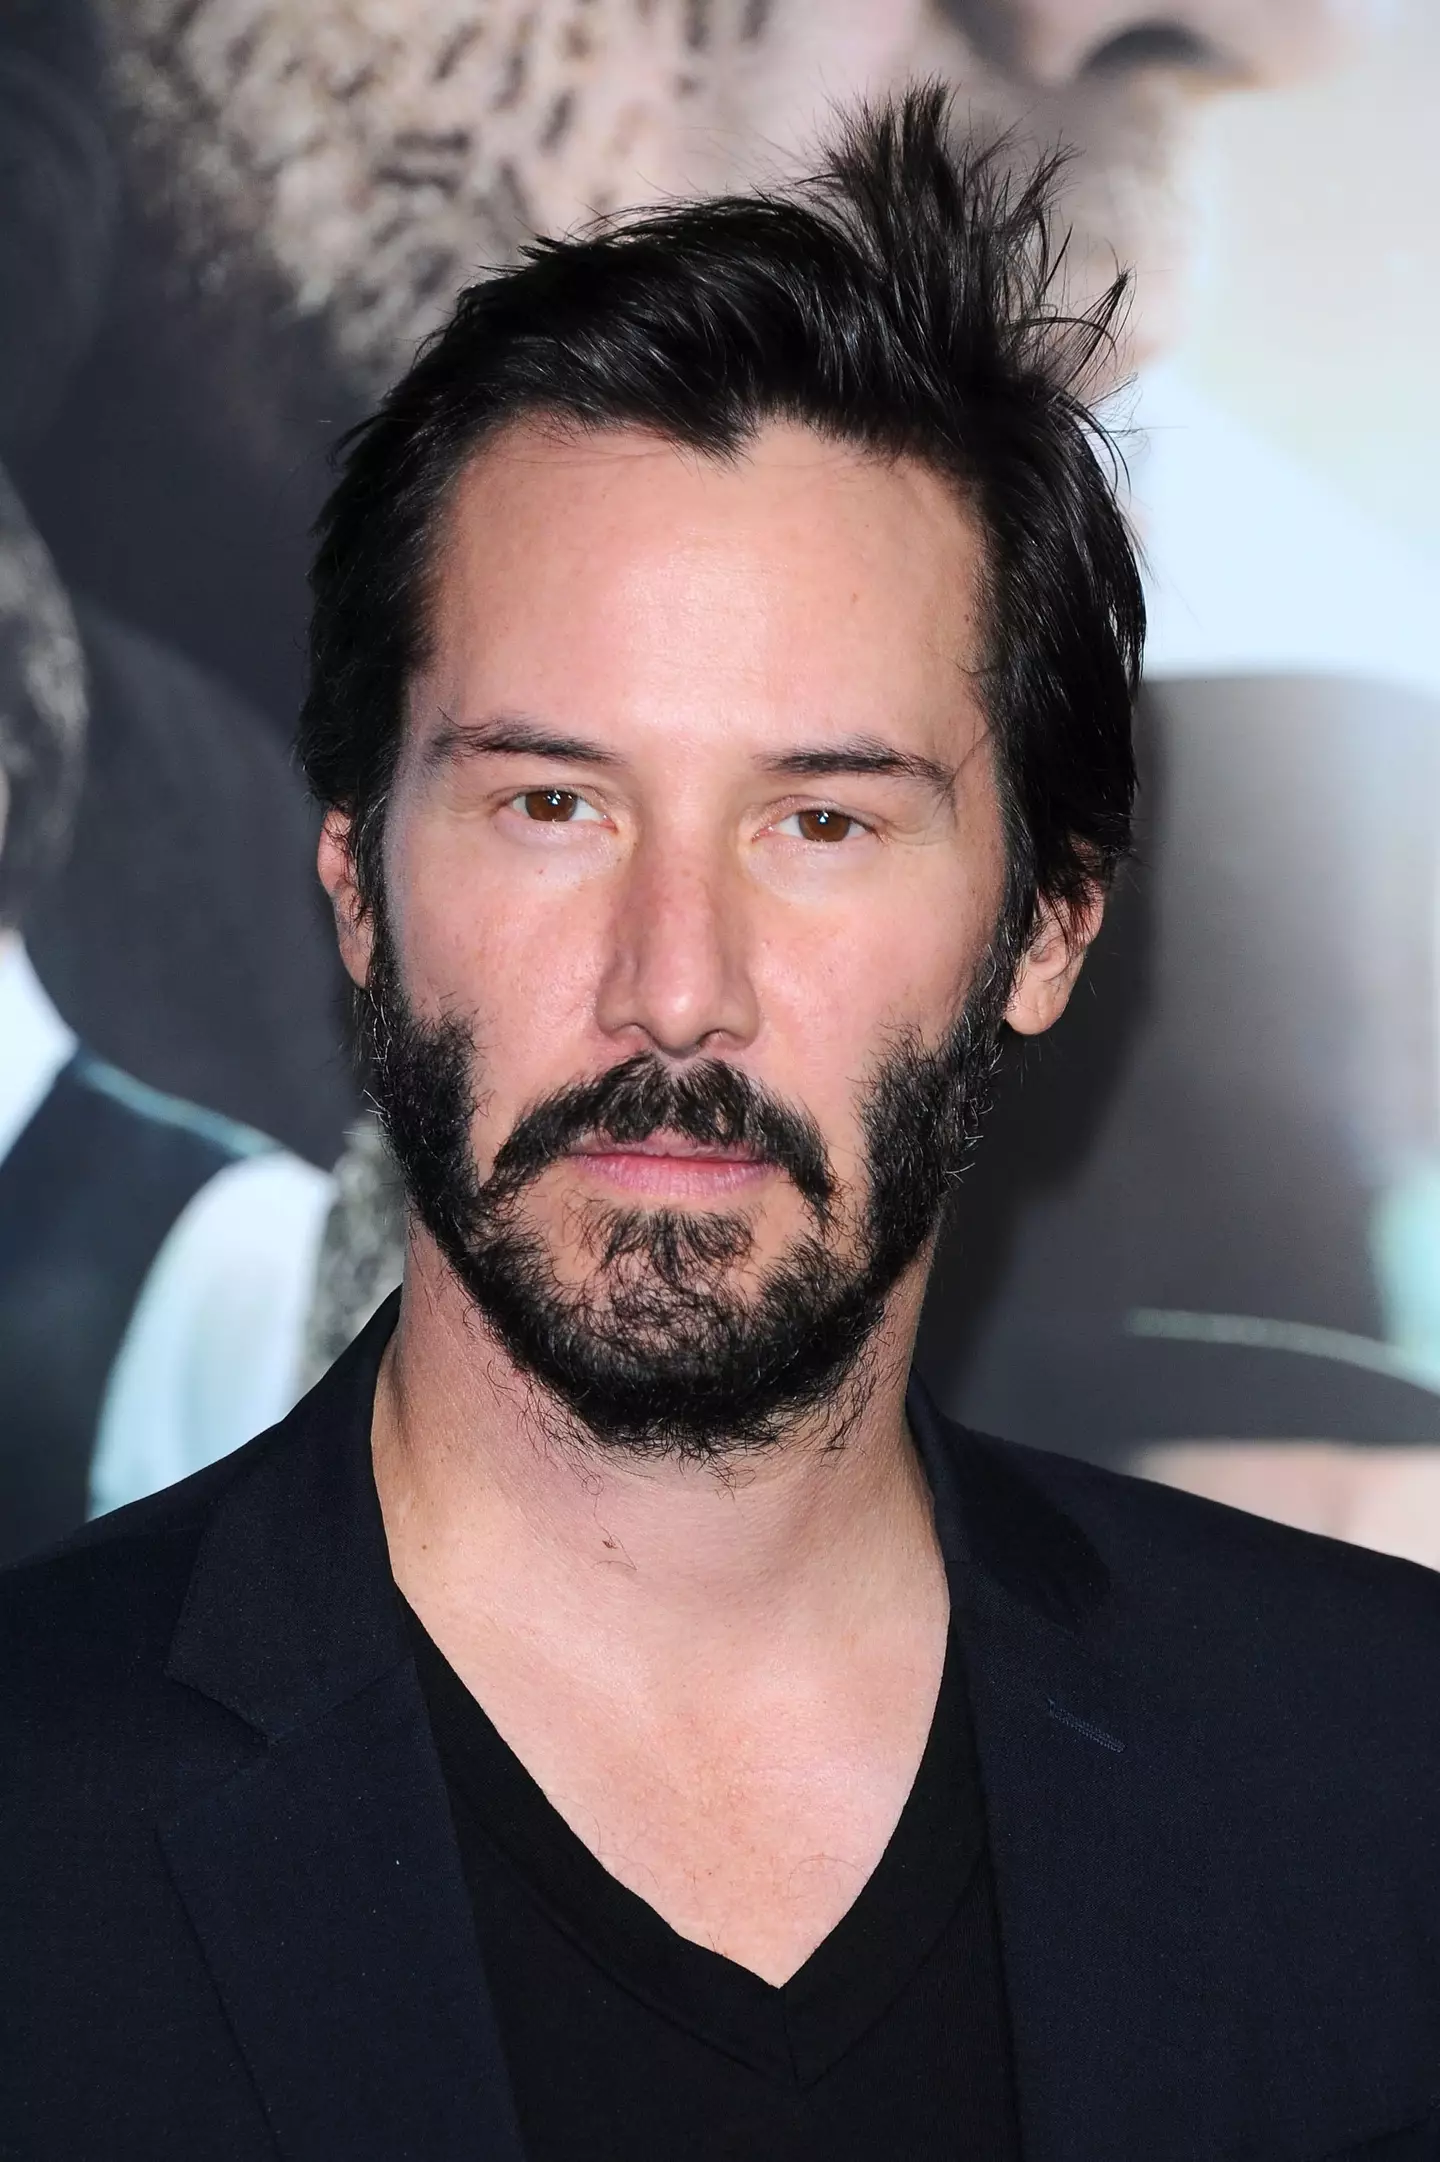 Keanu Reeves also considered changing his name.